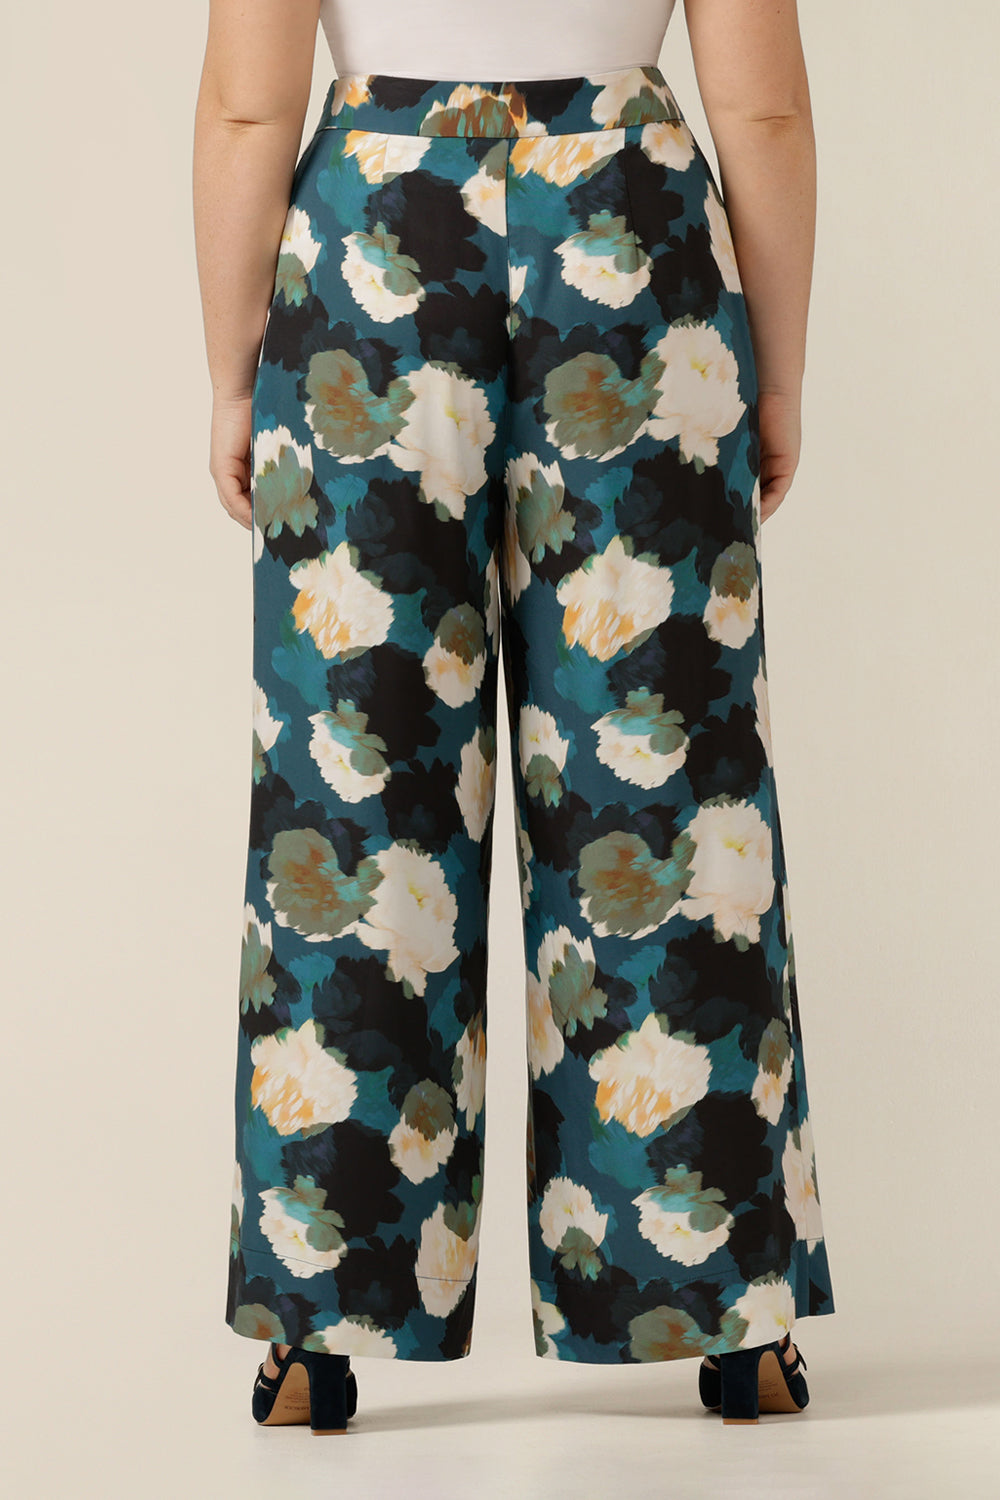 a size 12 woman wears high-waisted printed wide-leg trousers. Made in Australia from sustainable natural fibres, these luxury eco-conscious pants are part of women's clothing brand, elarroyoenterprises's focus on luxury sustainable fashion.